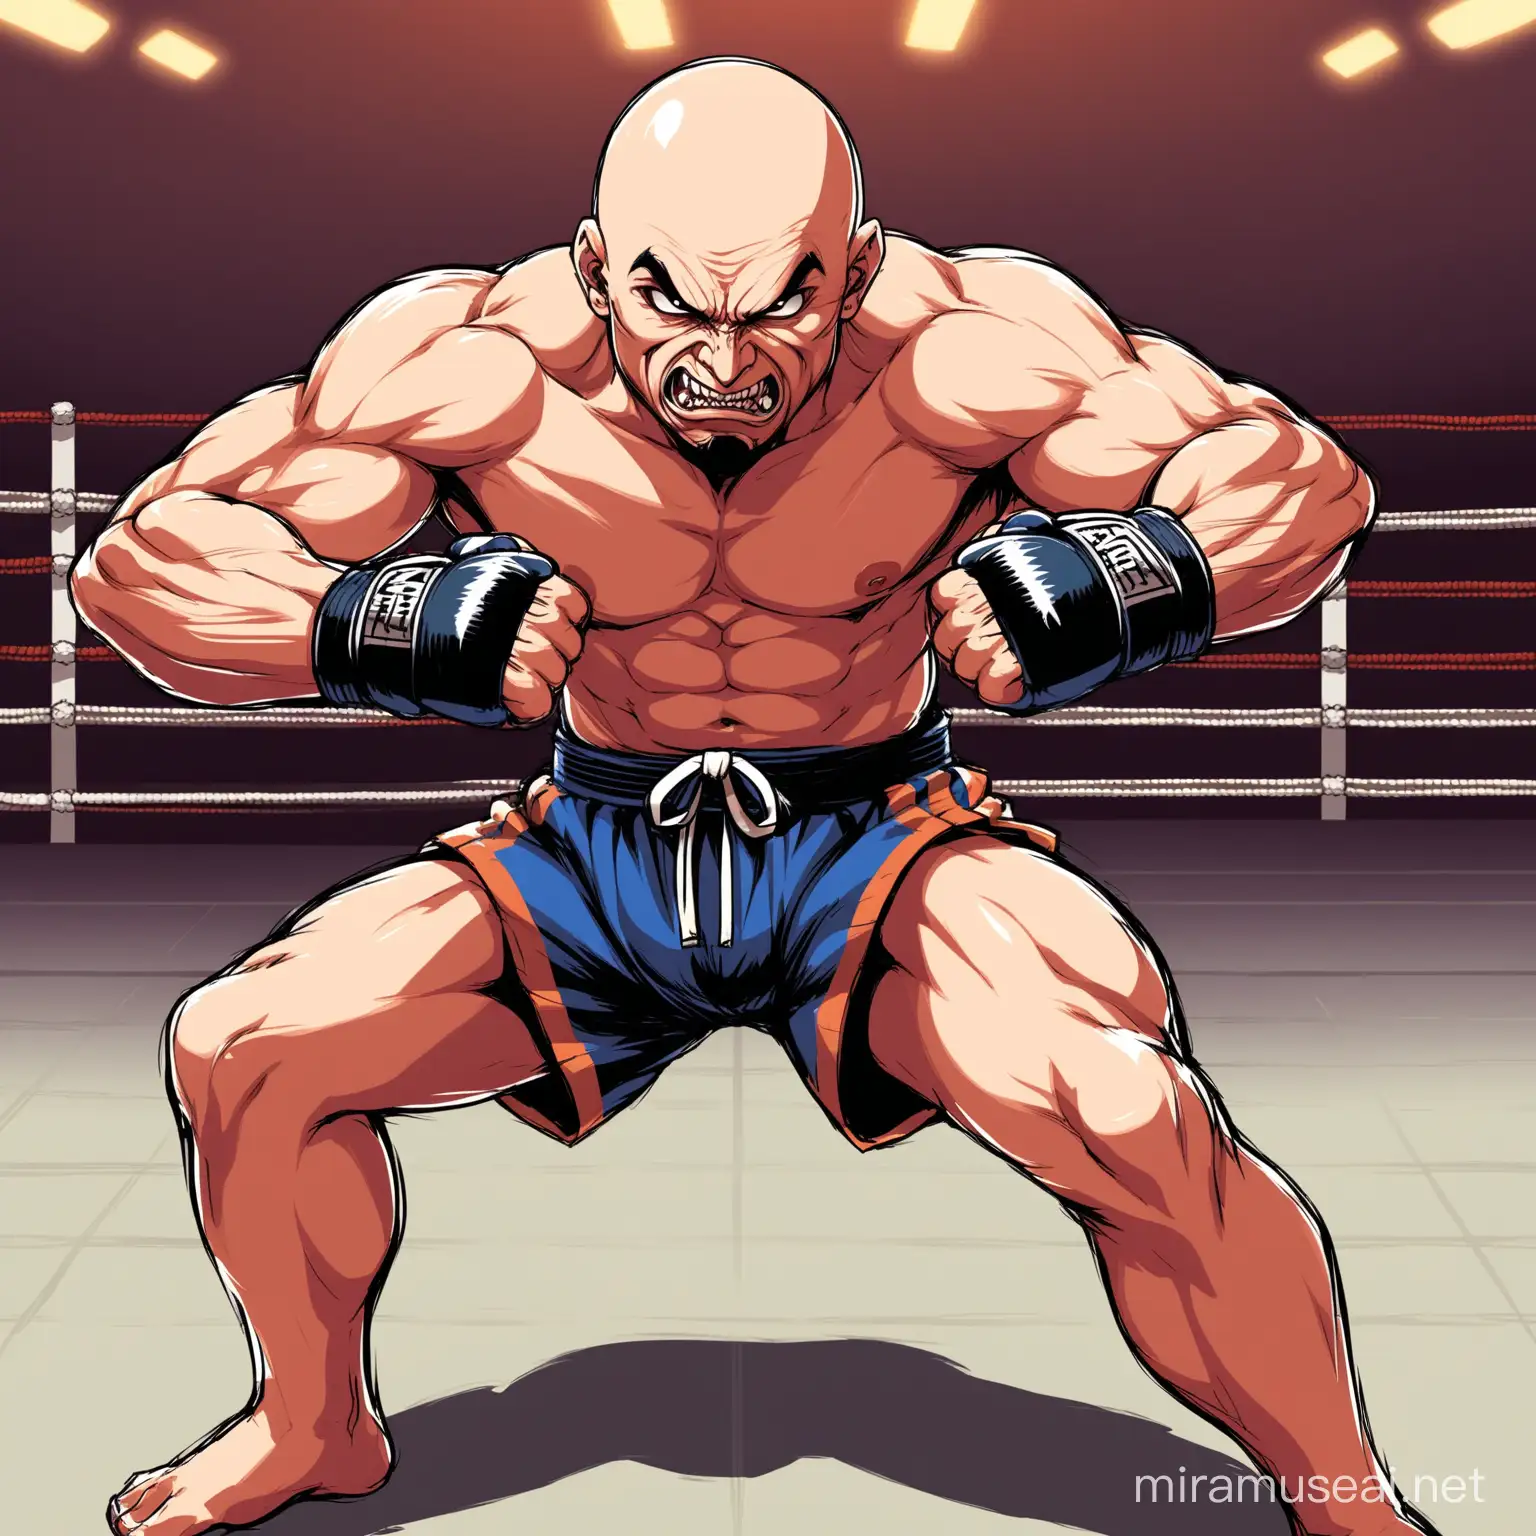 bald man character, evil face, strong, street fighter, muay thai position, shirtless, vector